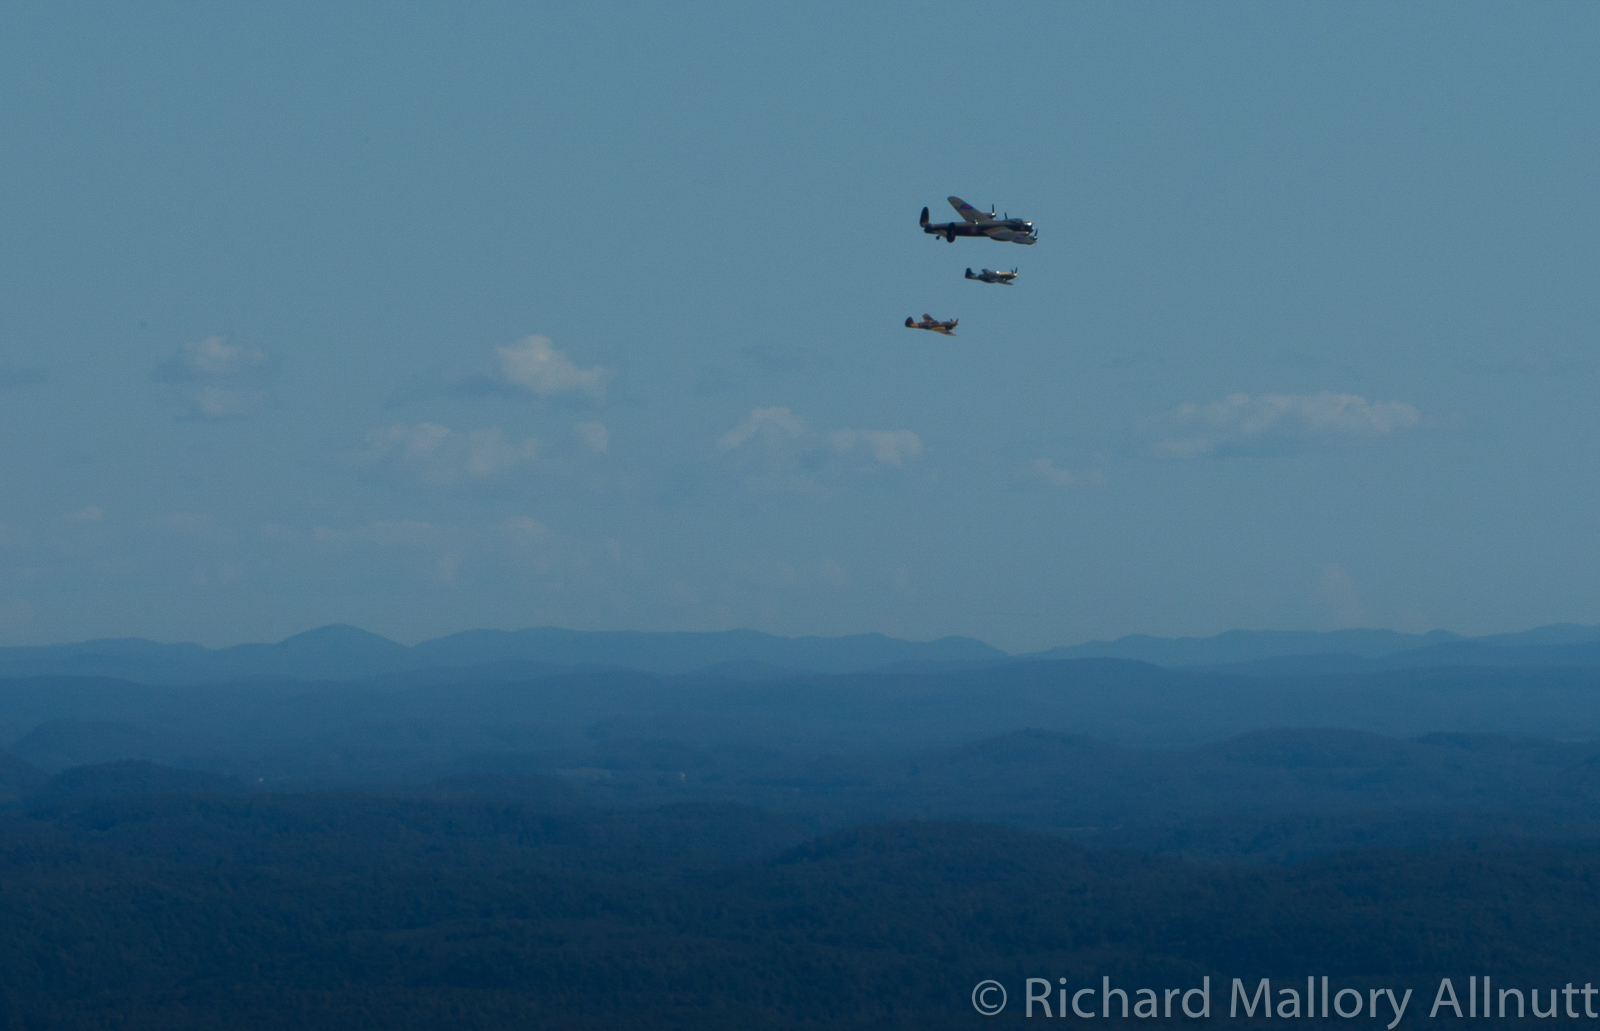 The Lancaster, Mustang and Kittyhawk over the Gatineau Hills. (photo by Richard Mallory Allnutt)